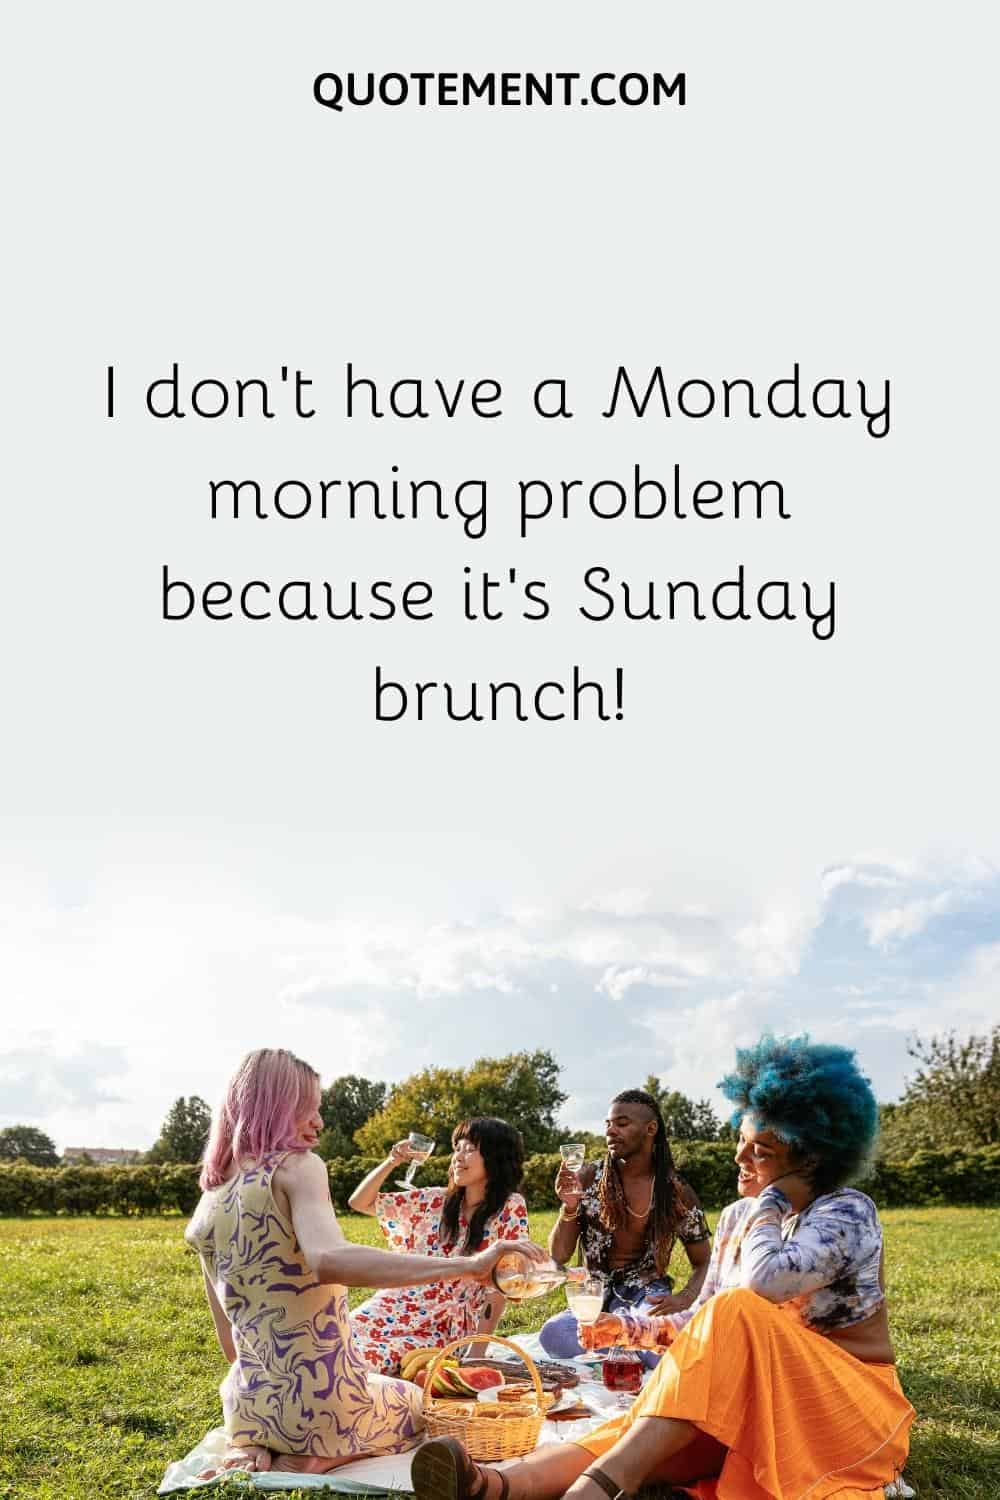 I don't have a Monday morning problem because it's Sunday brunch!